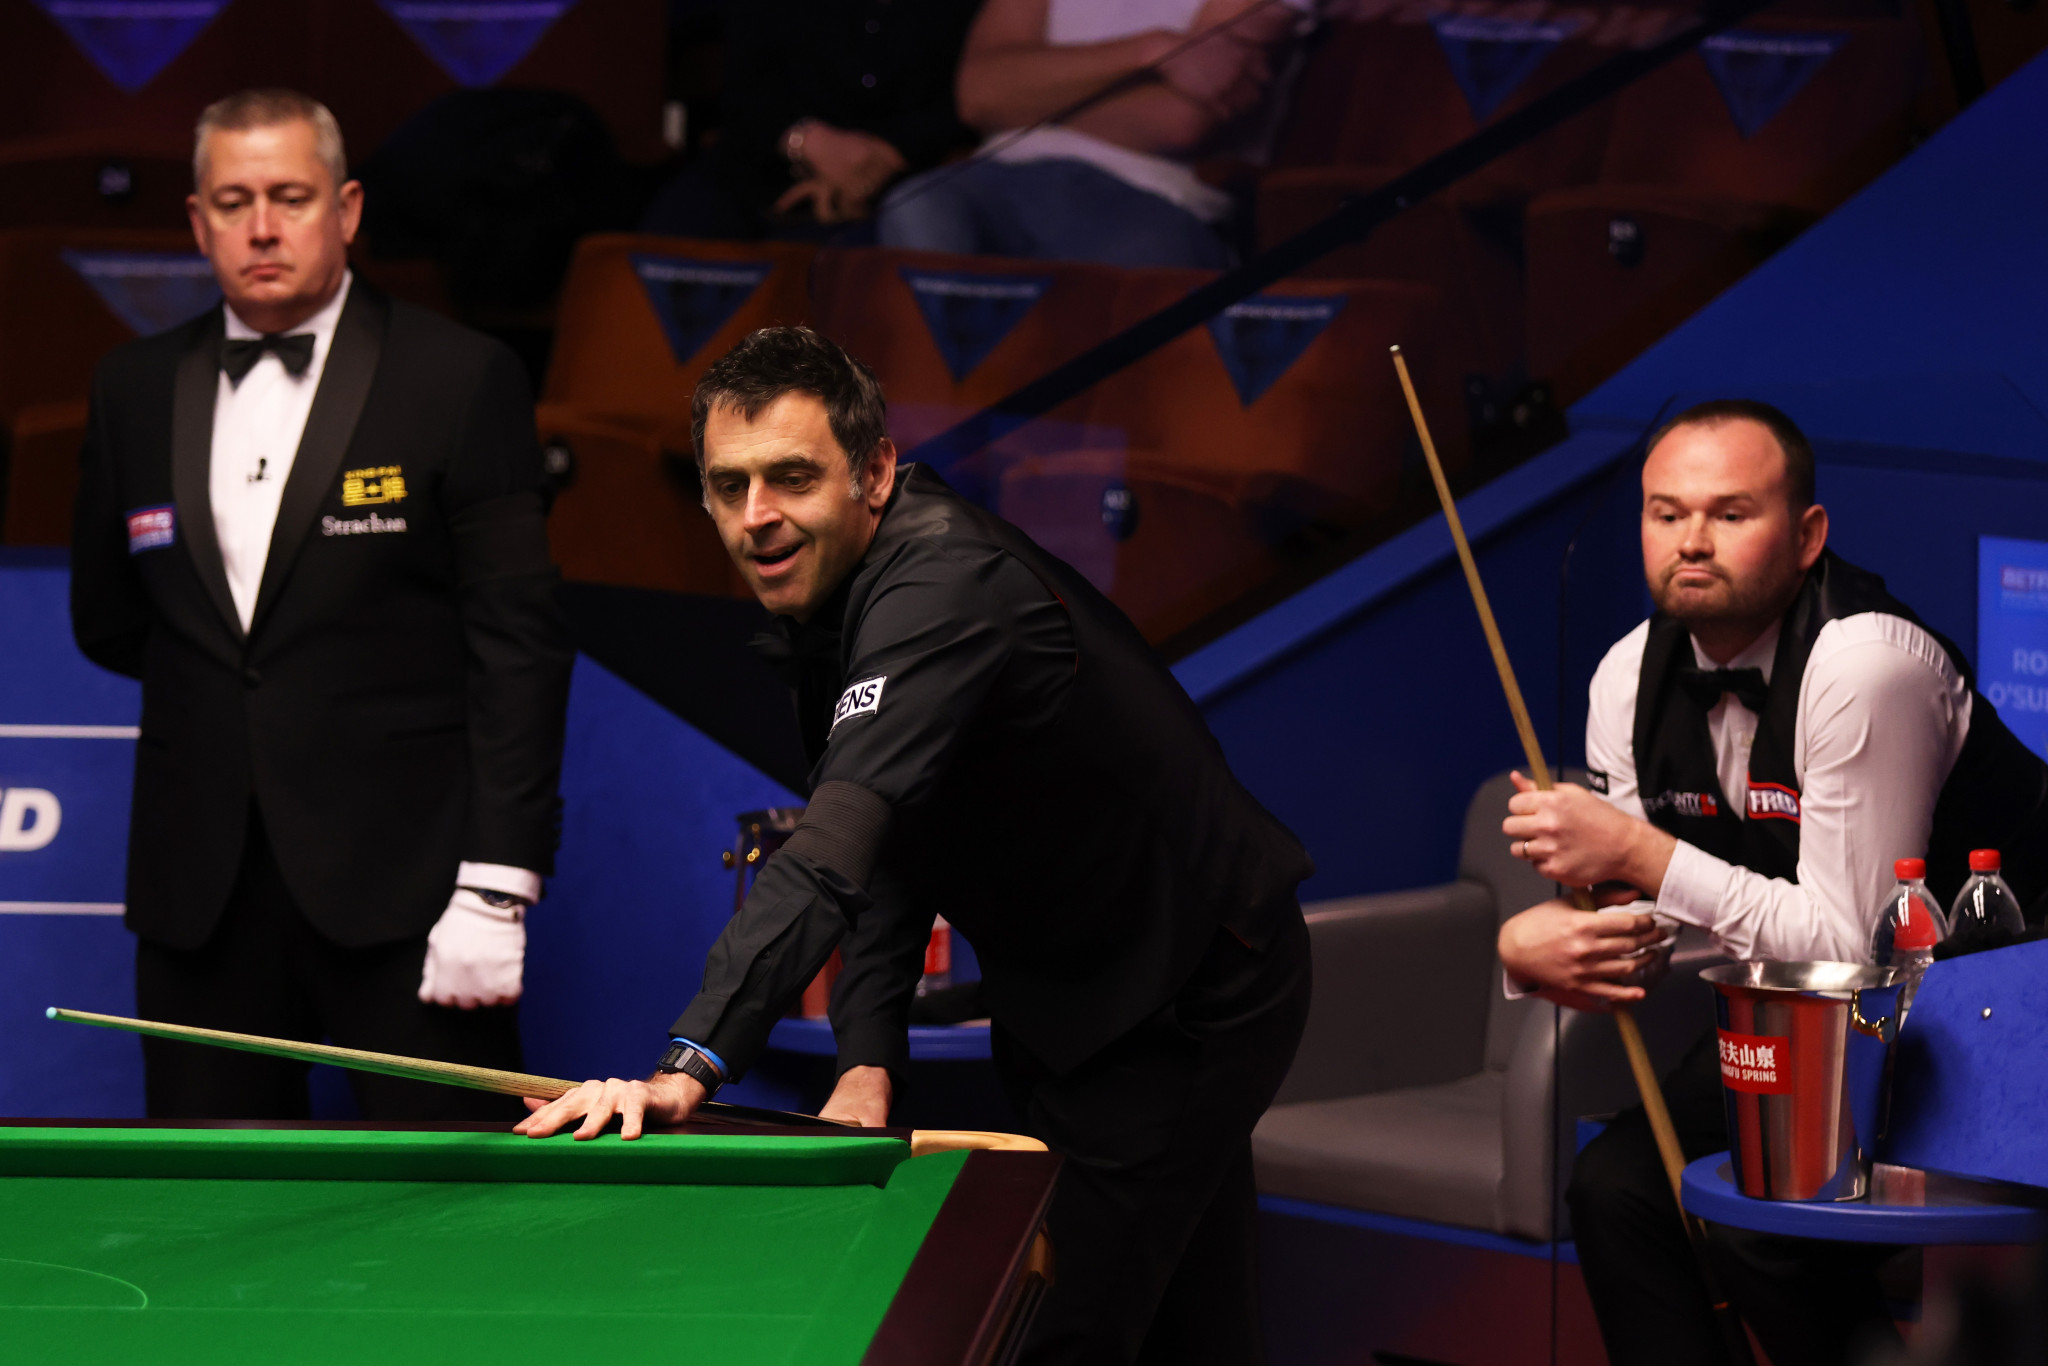 Defending champion O’Sullivan finishes strongly as he advances to second round of World Snooker Championship